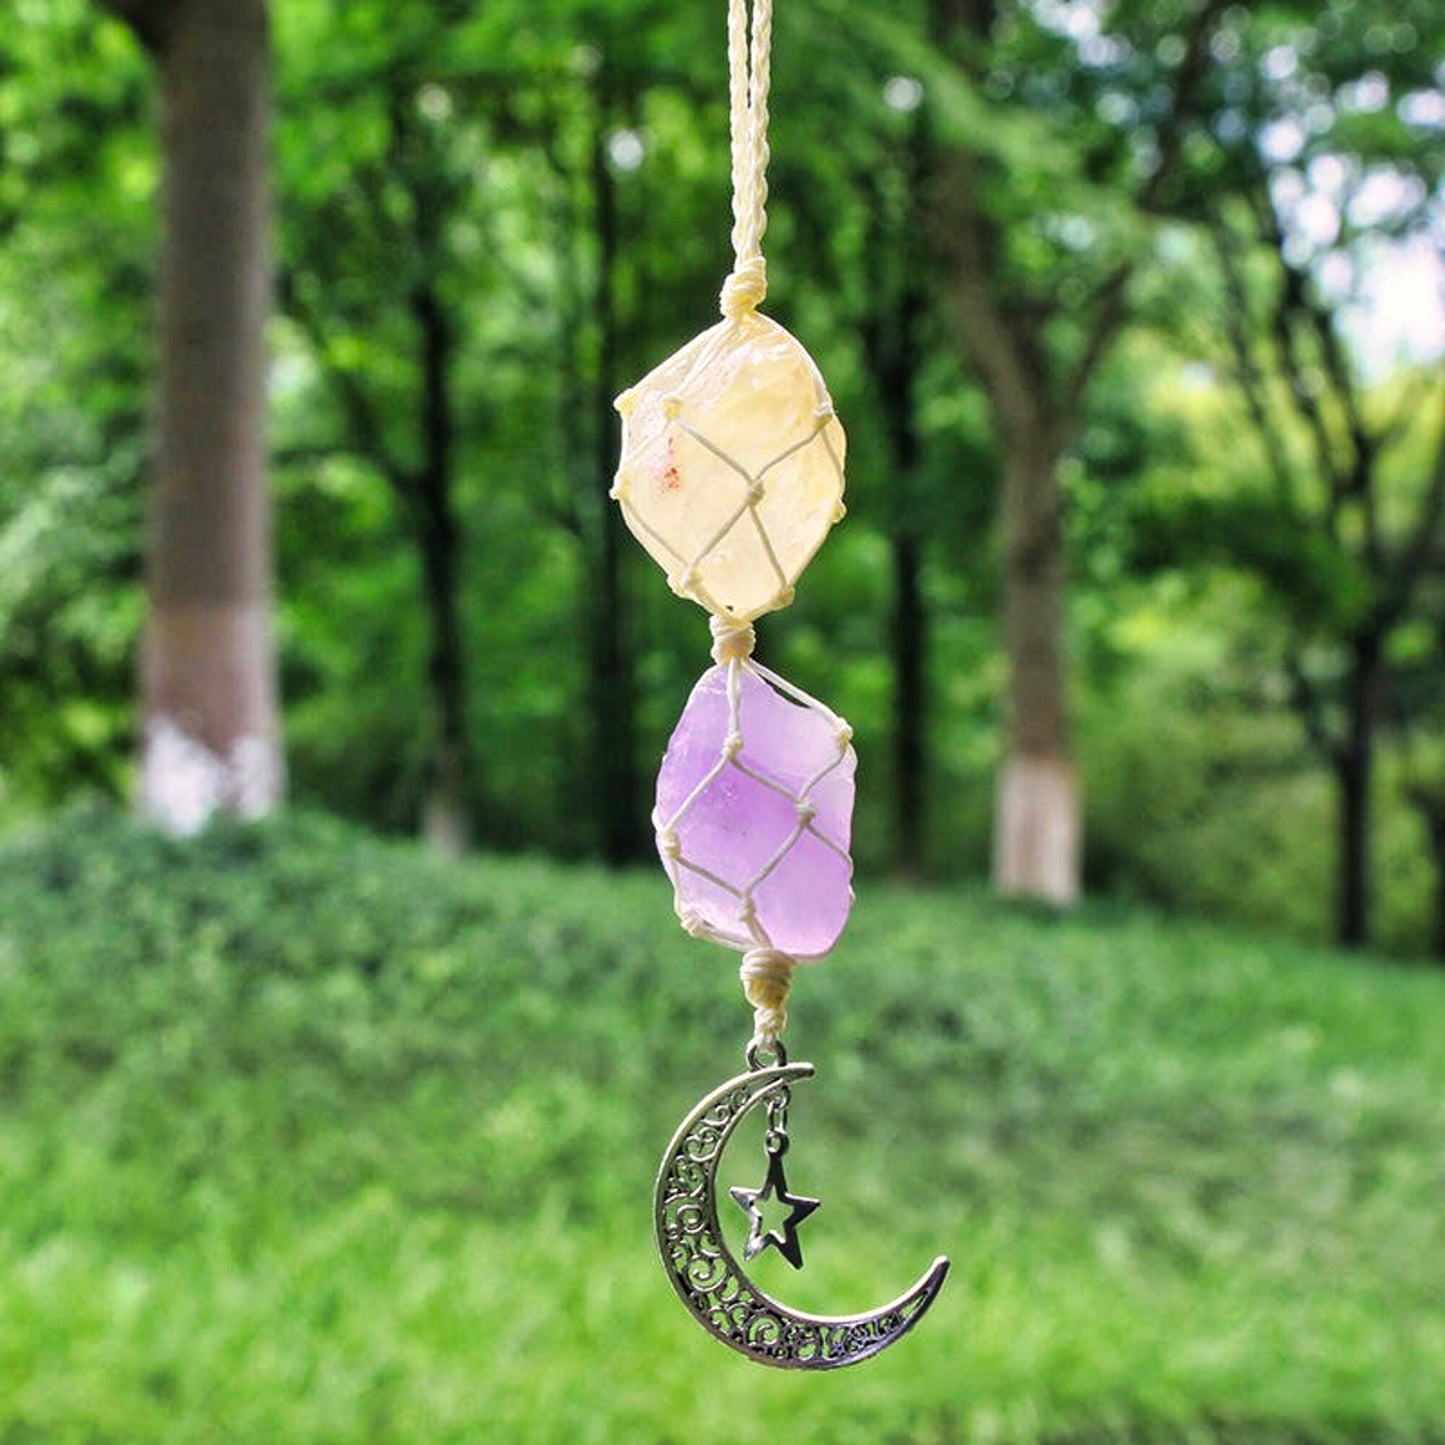 Custom Crystal Car Charm, Macrame Hanger, Women's Lucky Car Accessory, Rear View Decor, Personalized Crystal Vehicle Accent Good vibes Heal